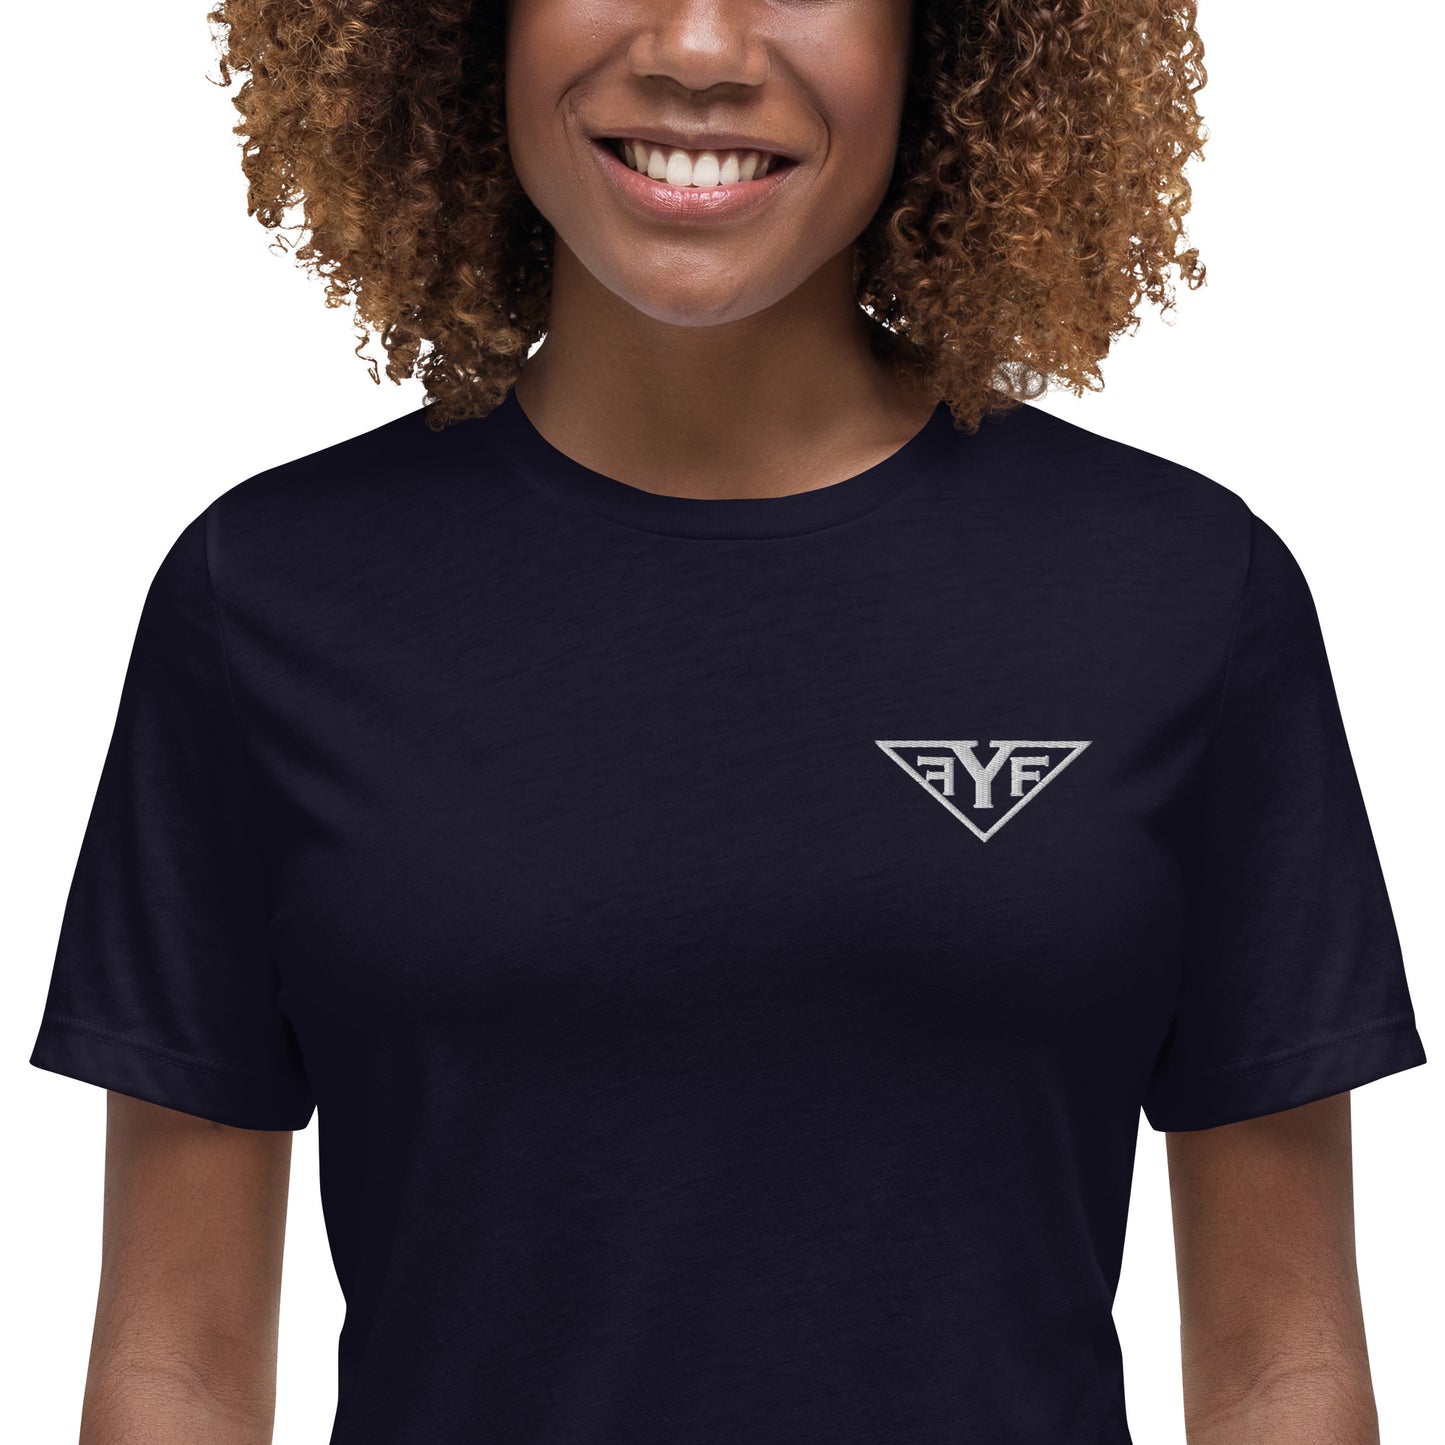 Women's Relaxed T-Shirt (NO WORDING ON BACK)